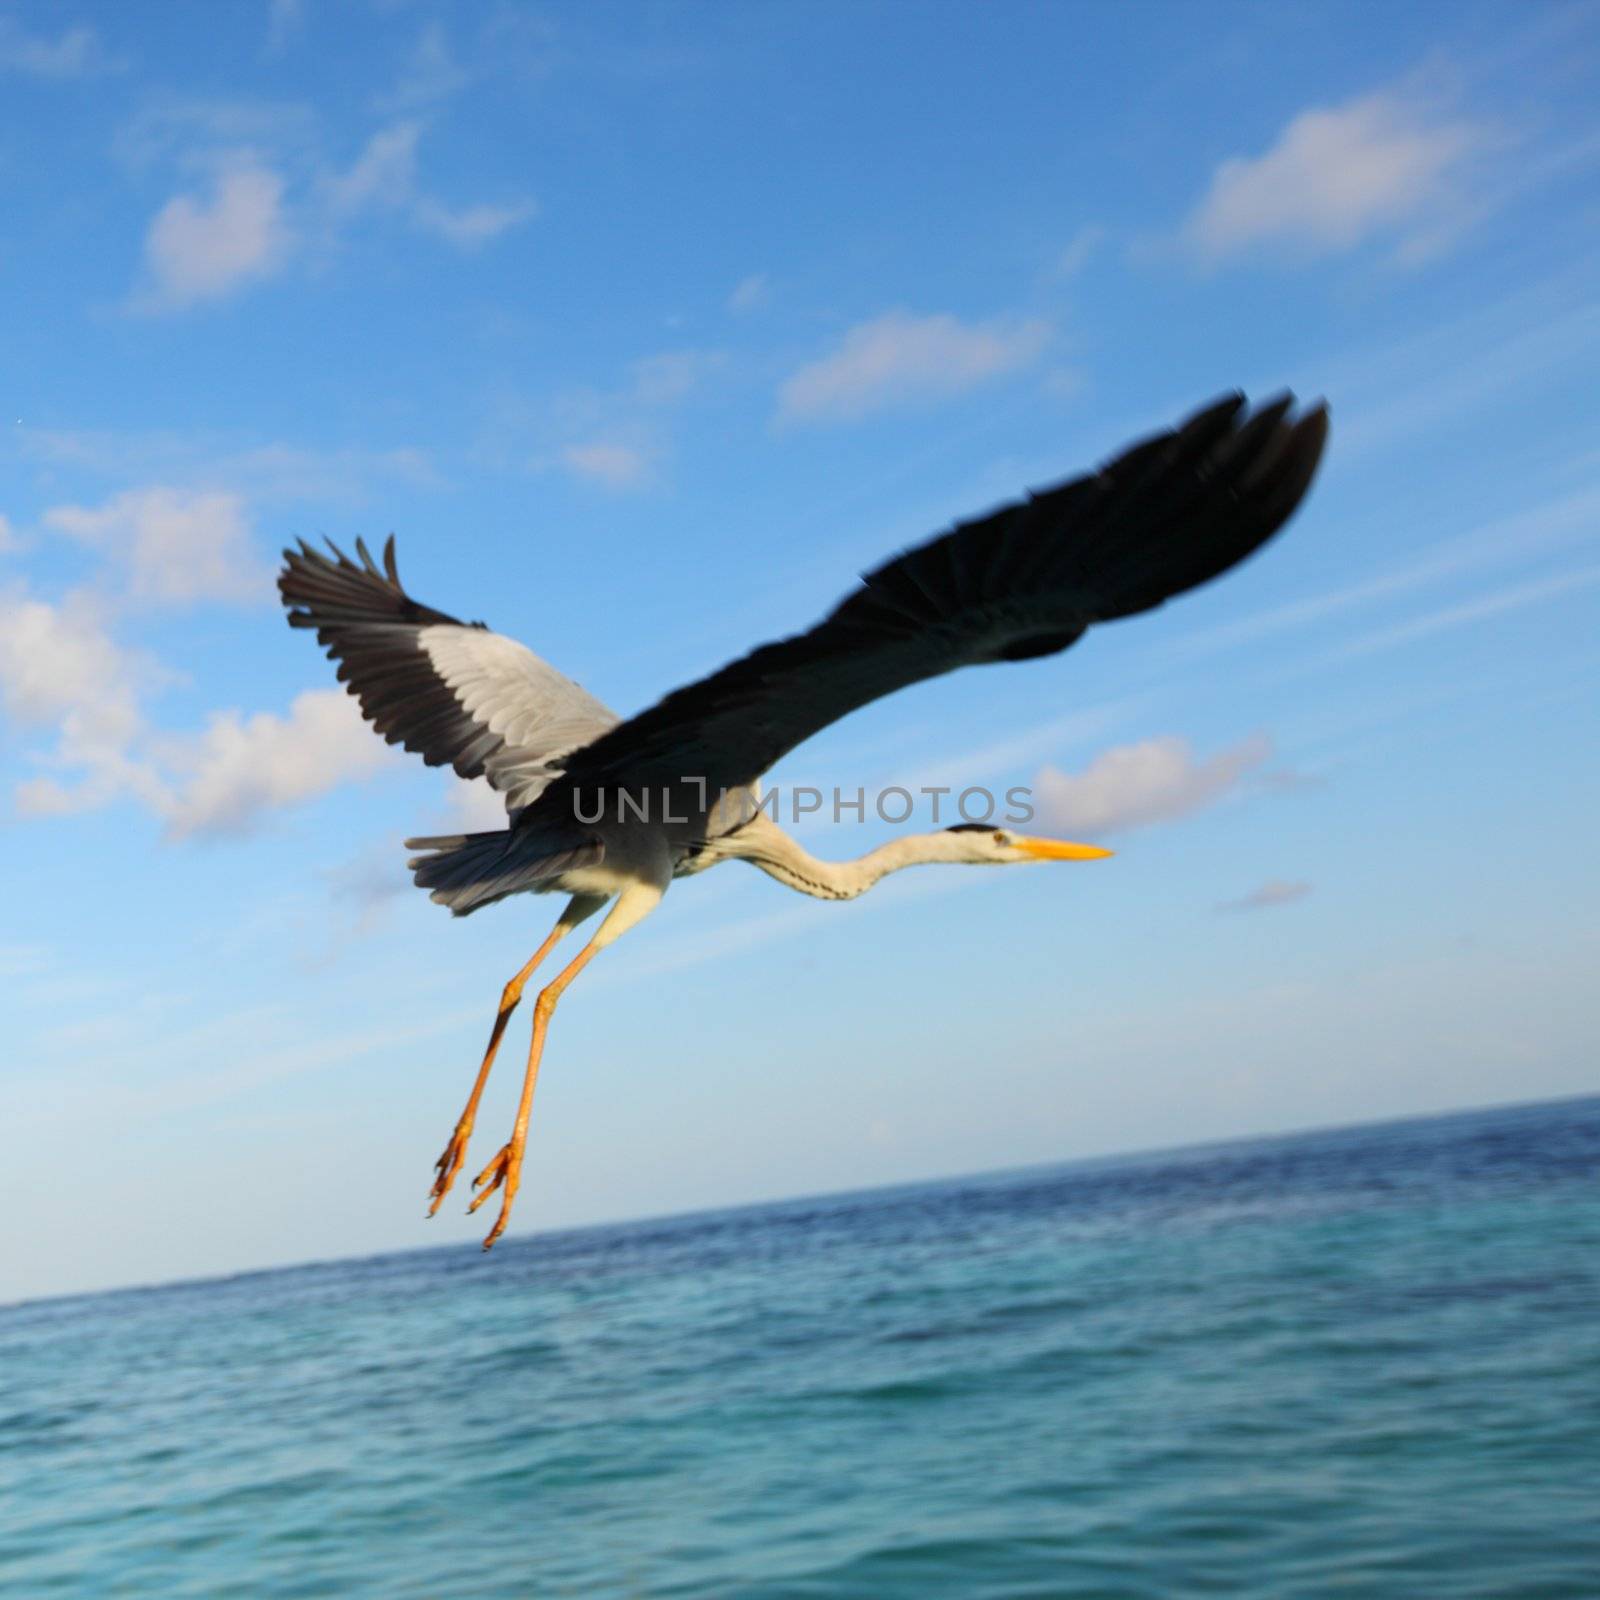 Stork on the ocean by Yellowj